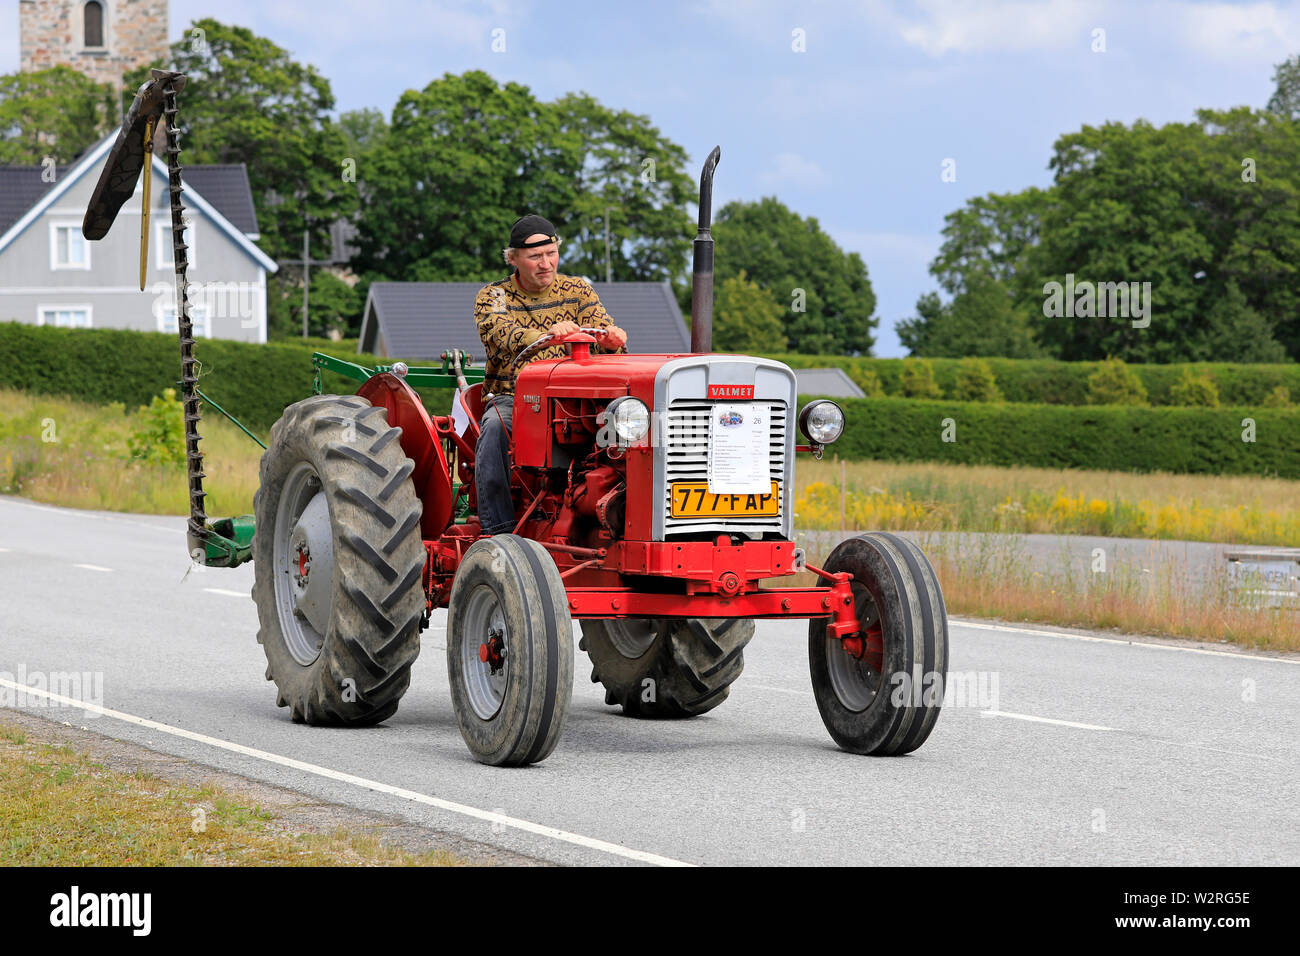 Kimito,Finland. July 6, 2019. Man drives Valmet 361 D tractor, year 1962, in front of farm equipment on Kimito Tractorkavalkad, vintage tractor parade Stock Photo